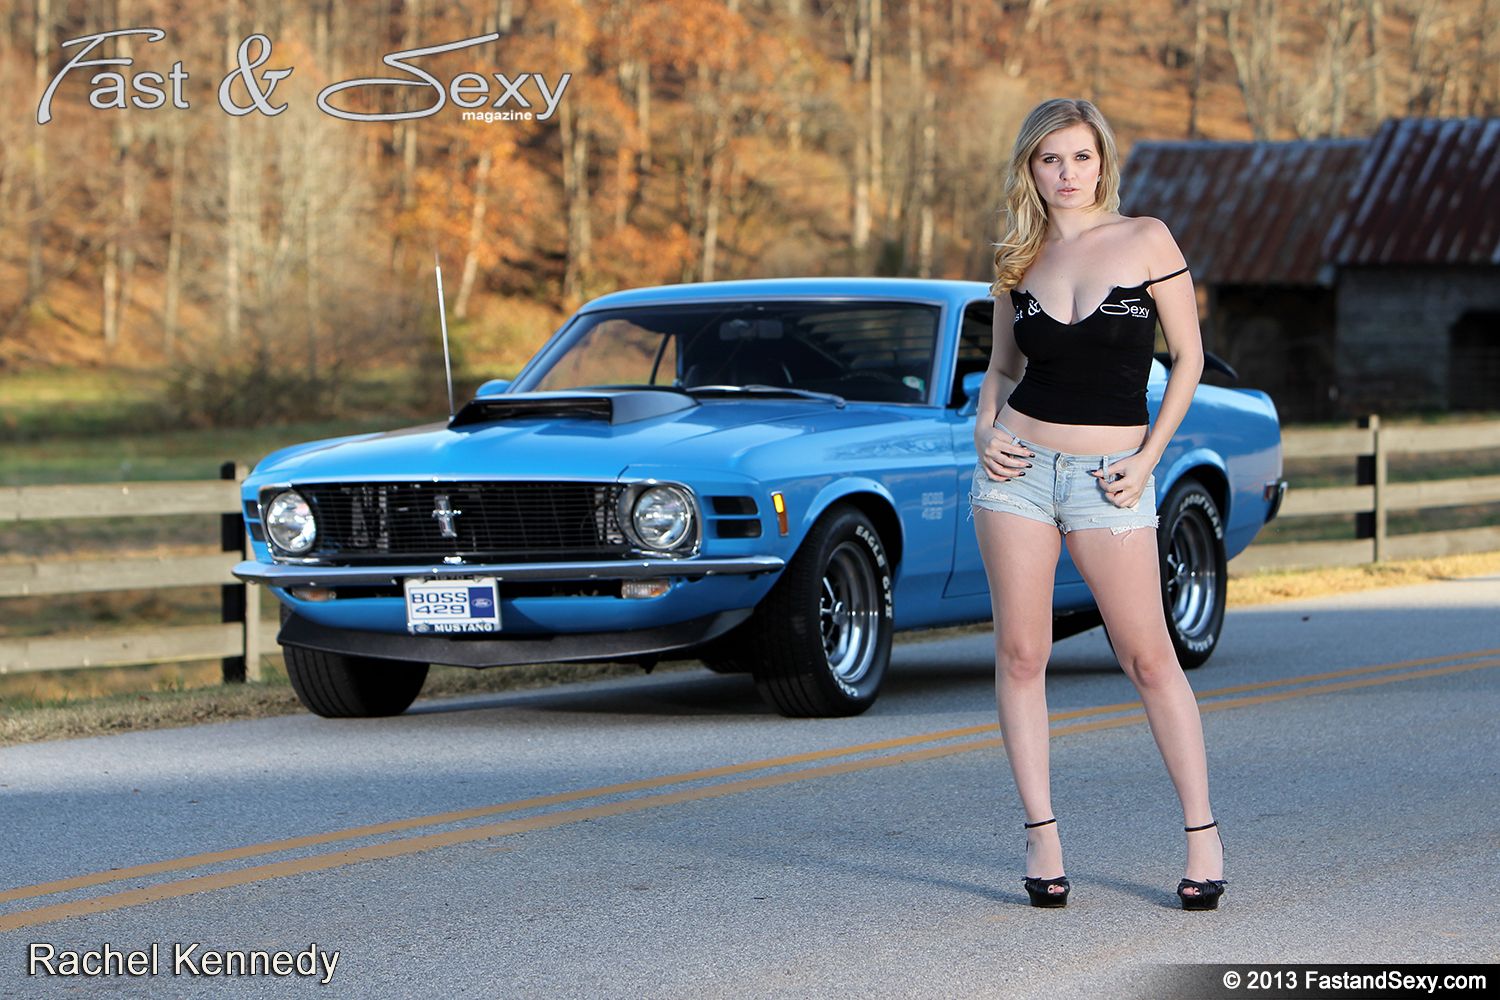 Classic mustang cars and nude girls